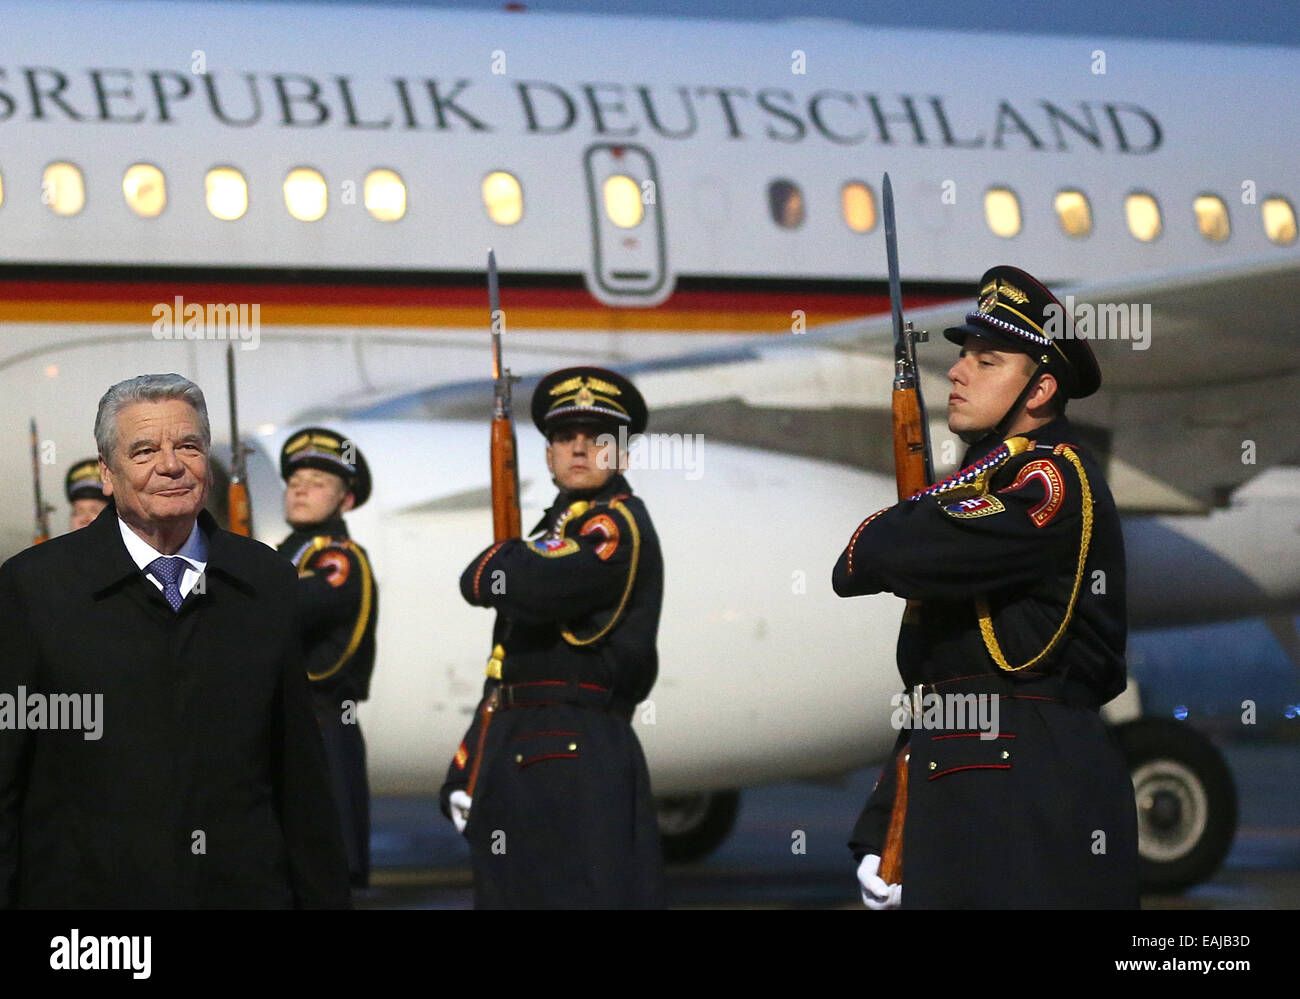 Bratislava, Slovakia. 16th Nov, 2014. German President Joachim Gauck (L) is welcomed with military honours at the airport in Bratislava, Slovakia, 16 November 2014. Gauck participates at the meeting of the presidents of the Visegrád states and of Germany on occasion of the commemoration '25 Jahre Friedliche Revolution' (lit. '25 years of peaceful revolution'). Photo: Wolfgang Kumm/dpa/Alamy Live News Stock Photo